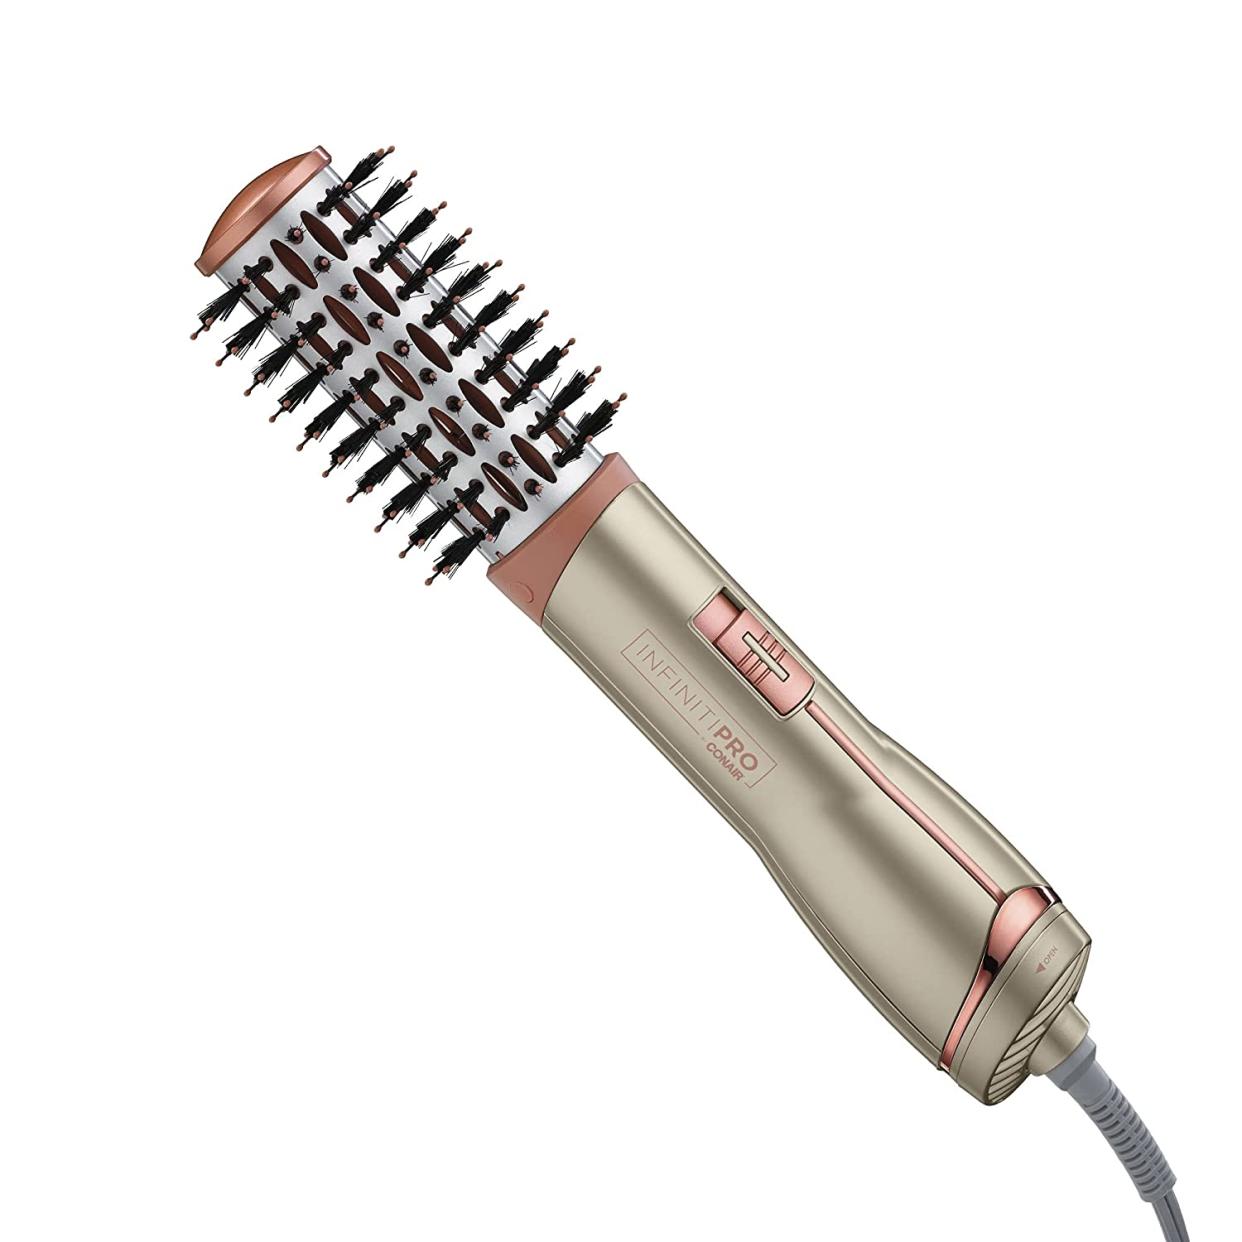 Get free of frizz and full of flair...with Conair! (Photo: Amazon)